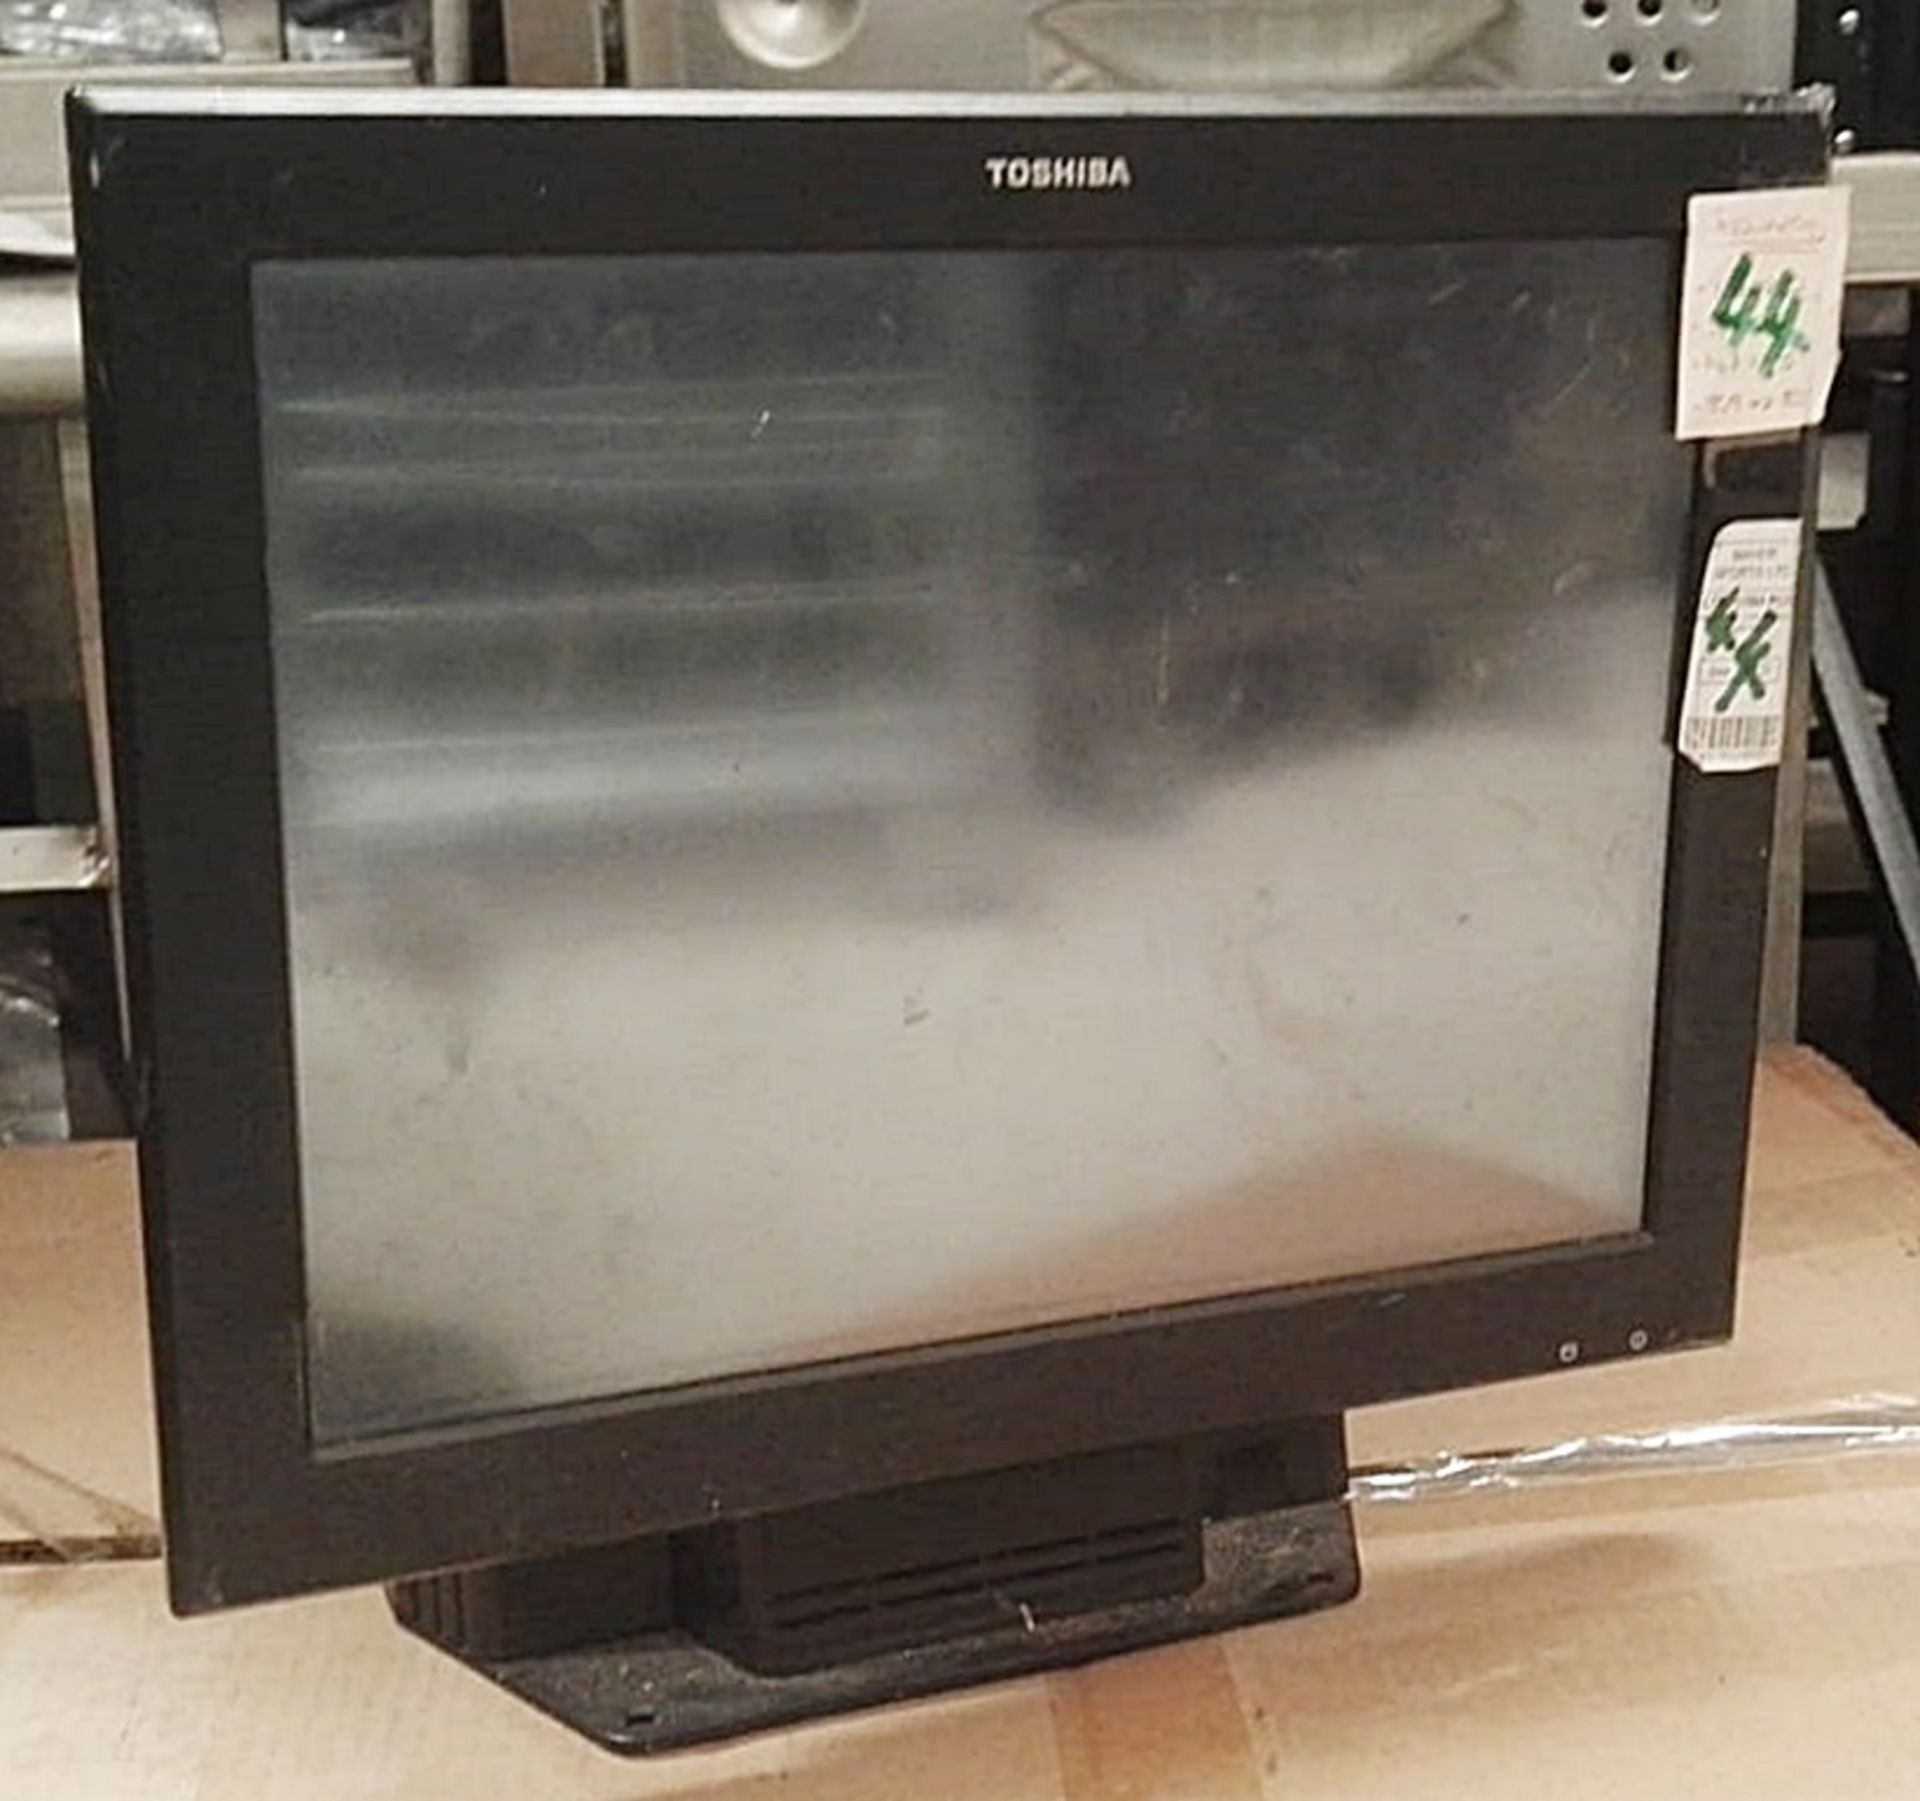 1 x Toshiba Till System - Used, Recently Removed From A Working Site - CL505 - Ref: TL044 -